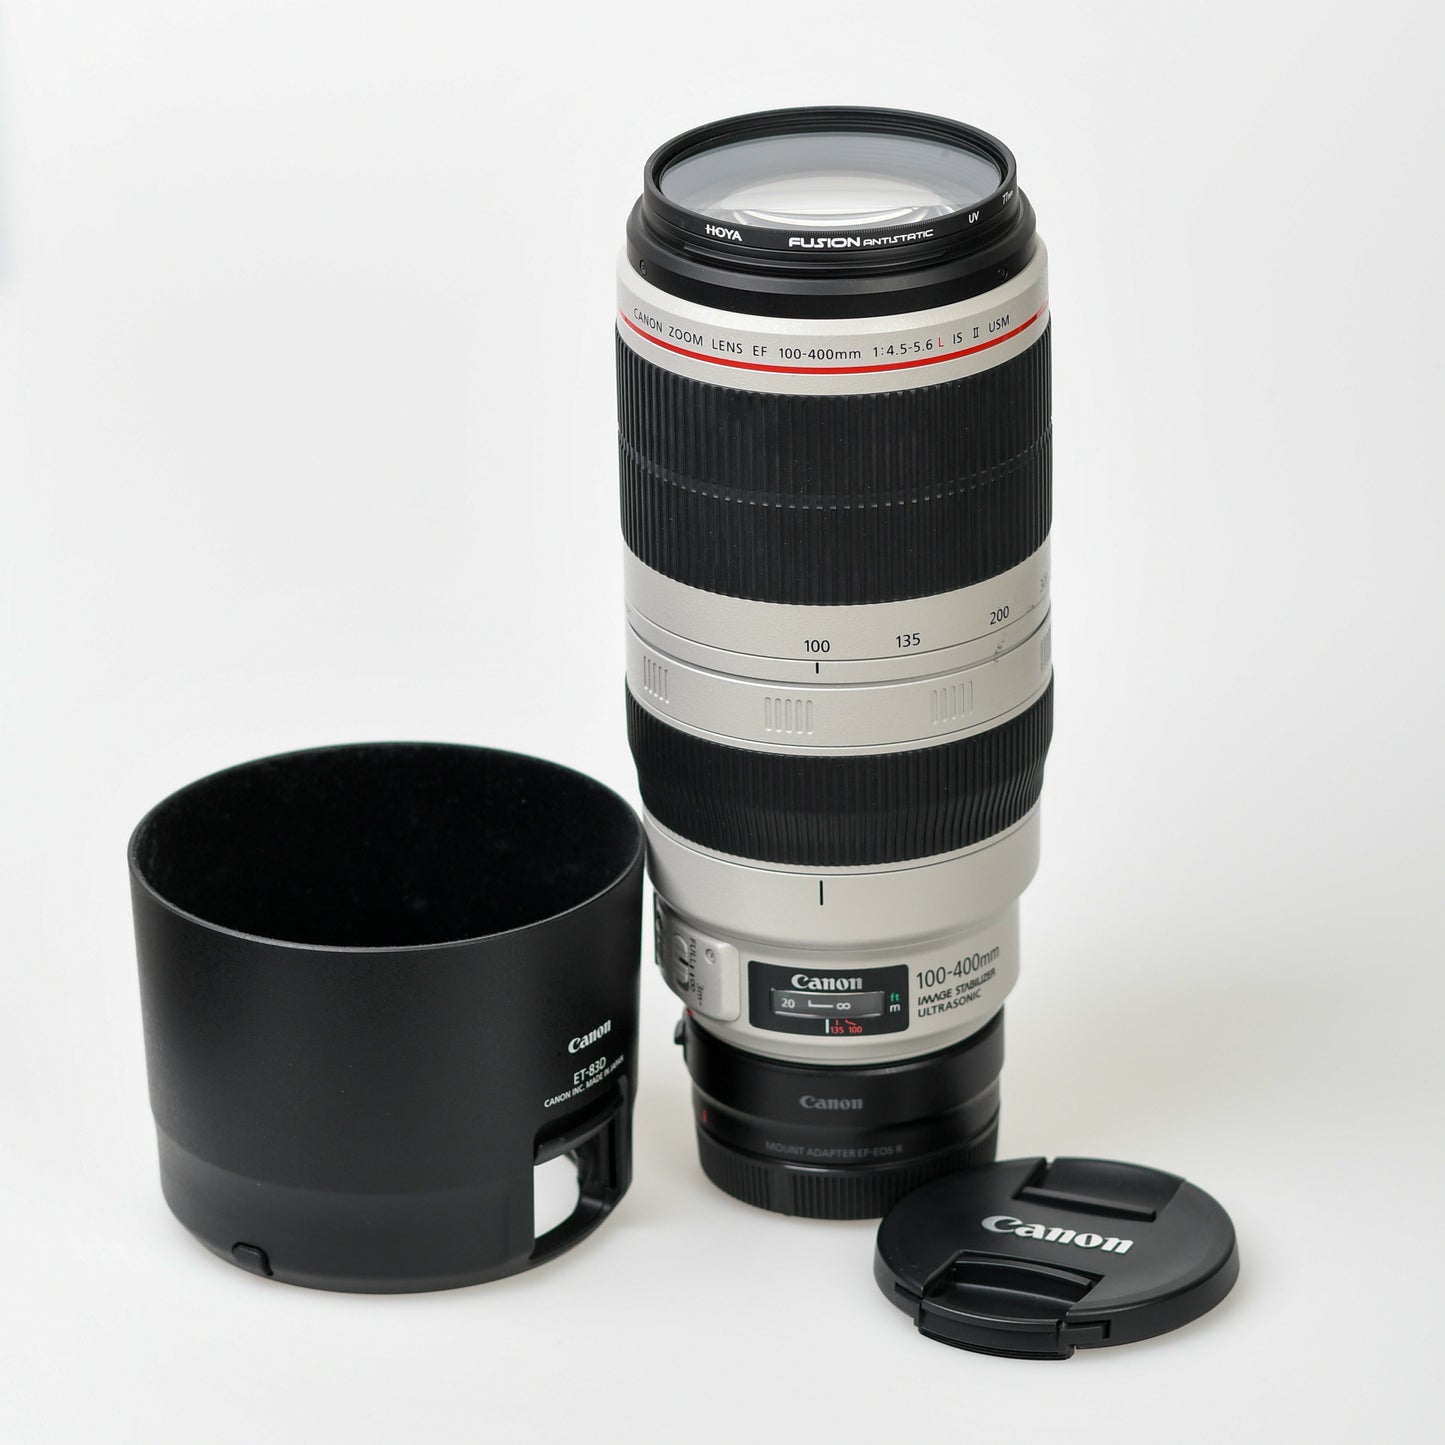 Canon EF 100-400mm 1:4.5-5.6 L IS II USM